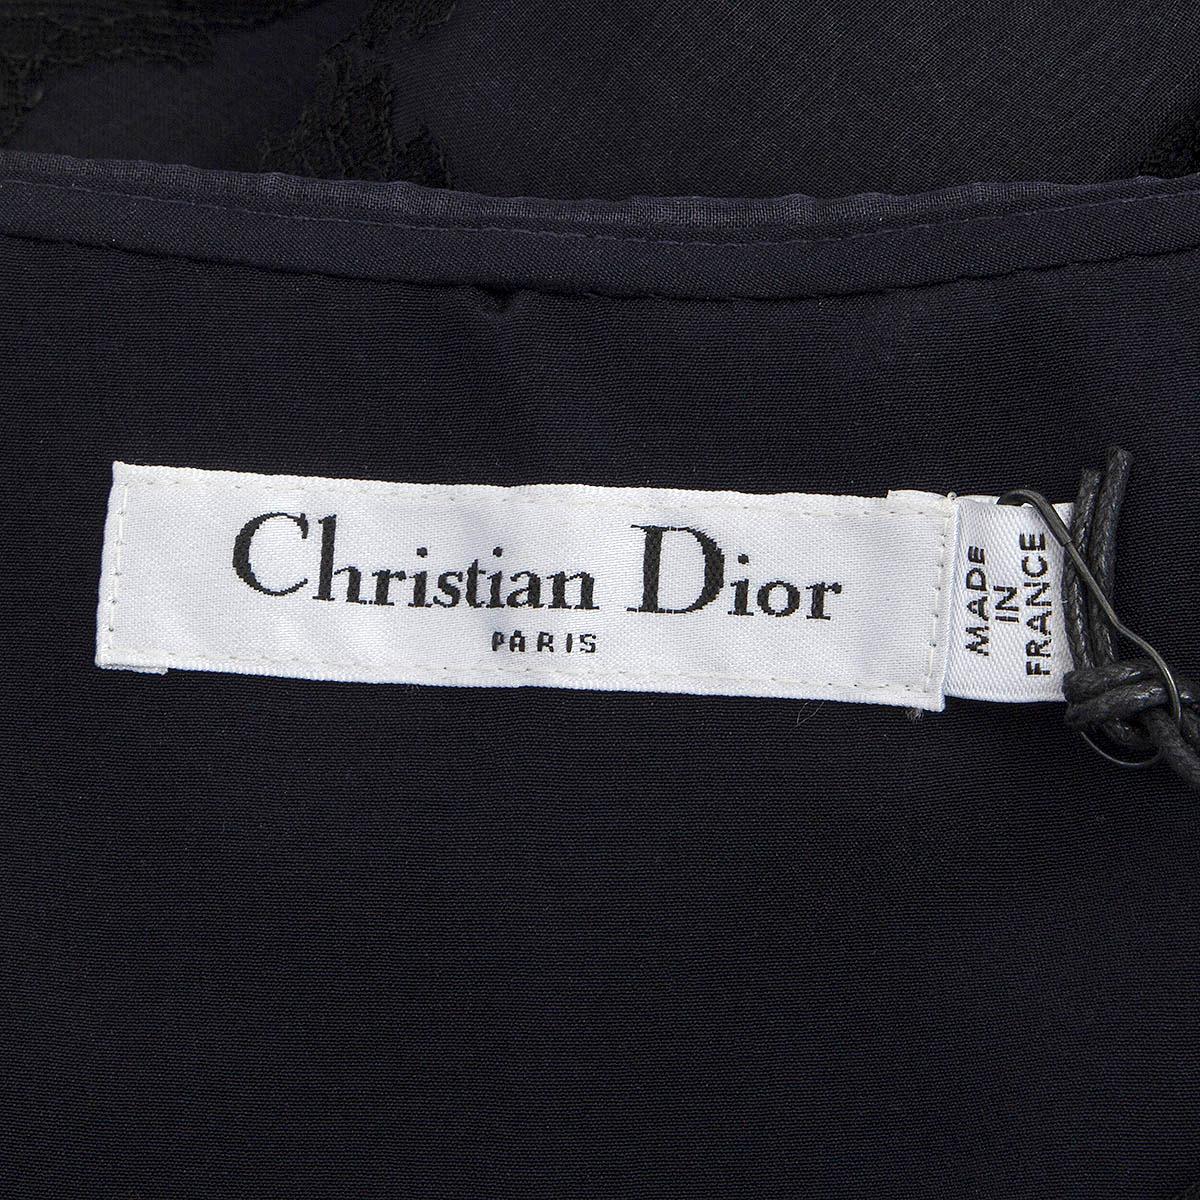 CHRISTIAN DIOR navy blue silk 2017 EMBROIDERED BELTED EVENING GOWN Dress 38 S 2